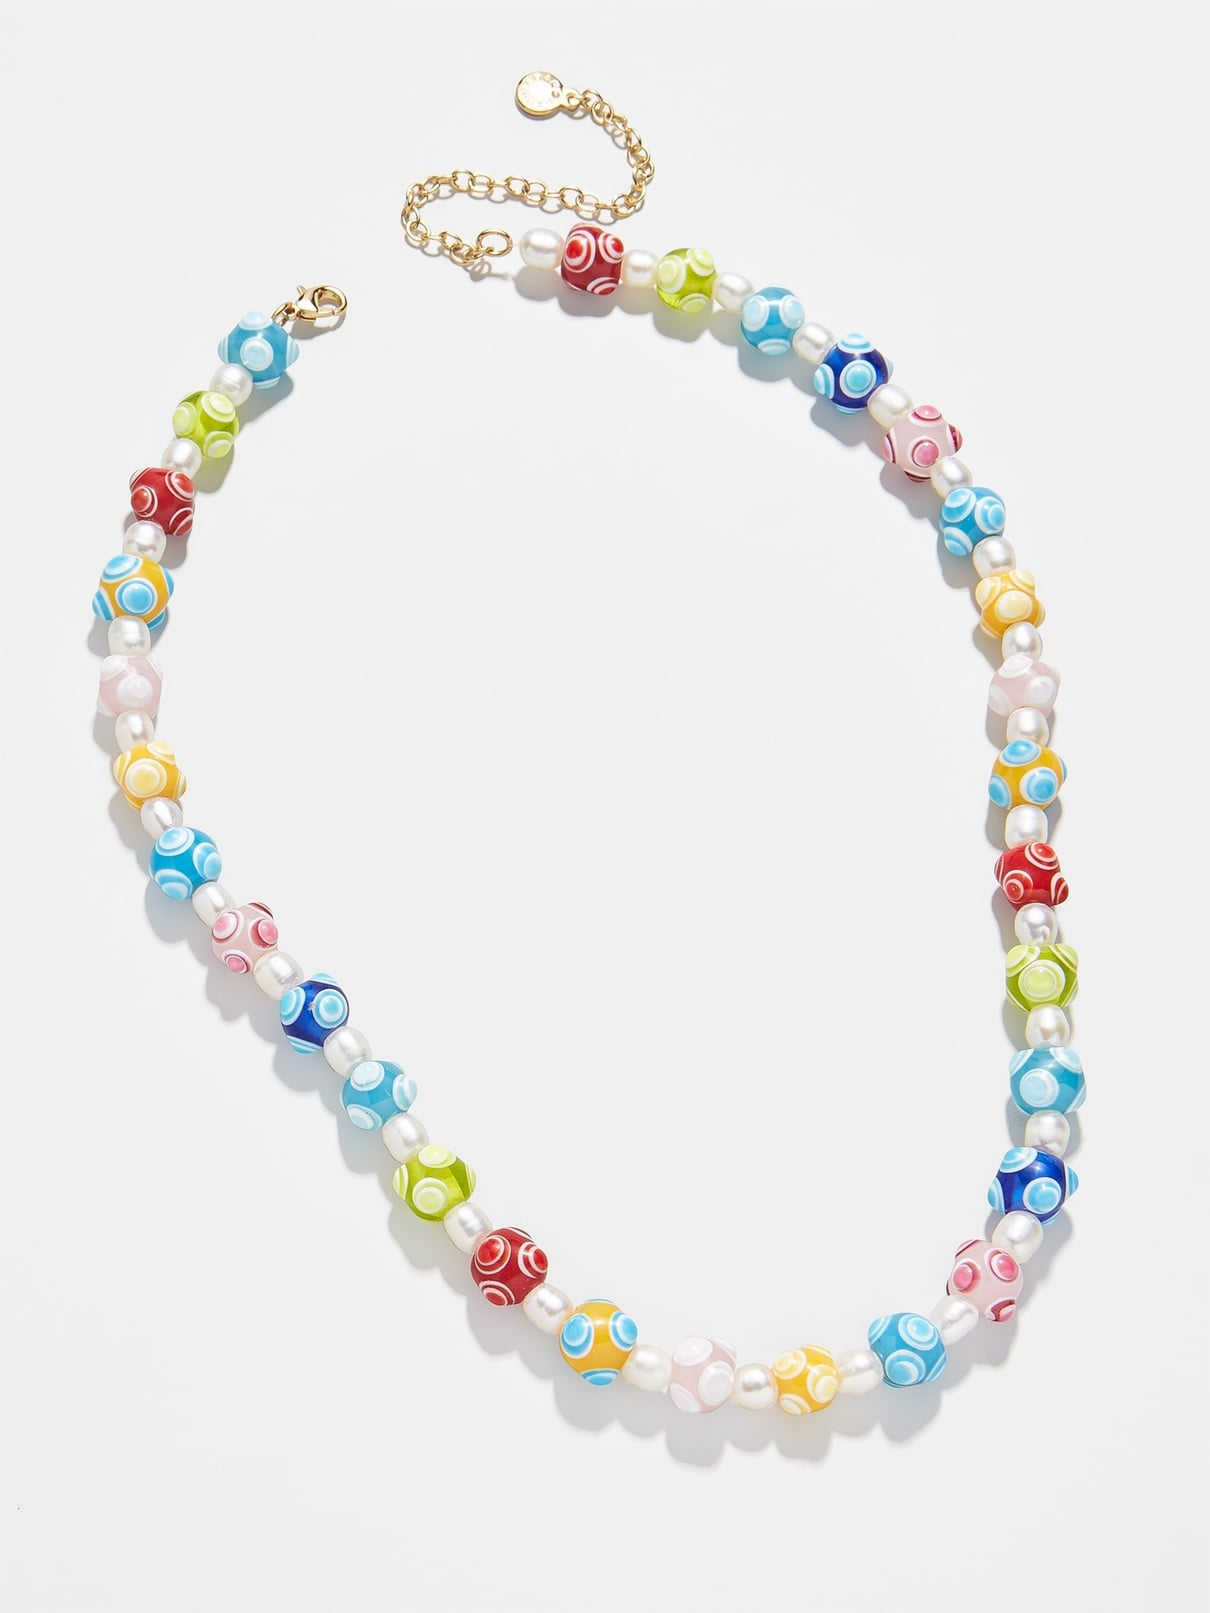 Colorful Beaded Jewelry Is Back and Better Than Ever - PureWow